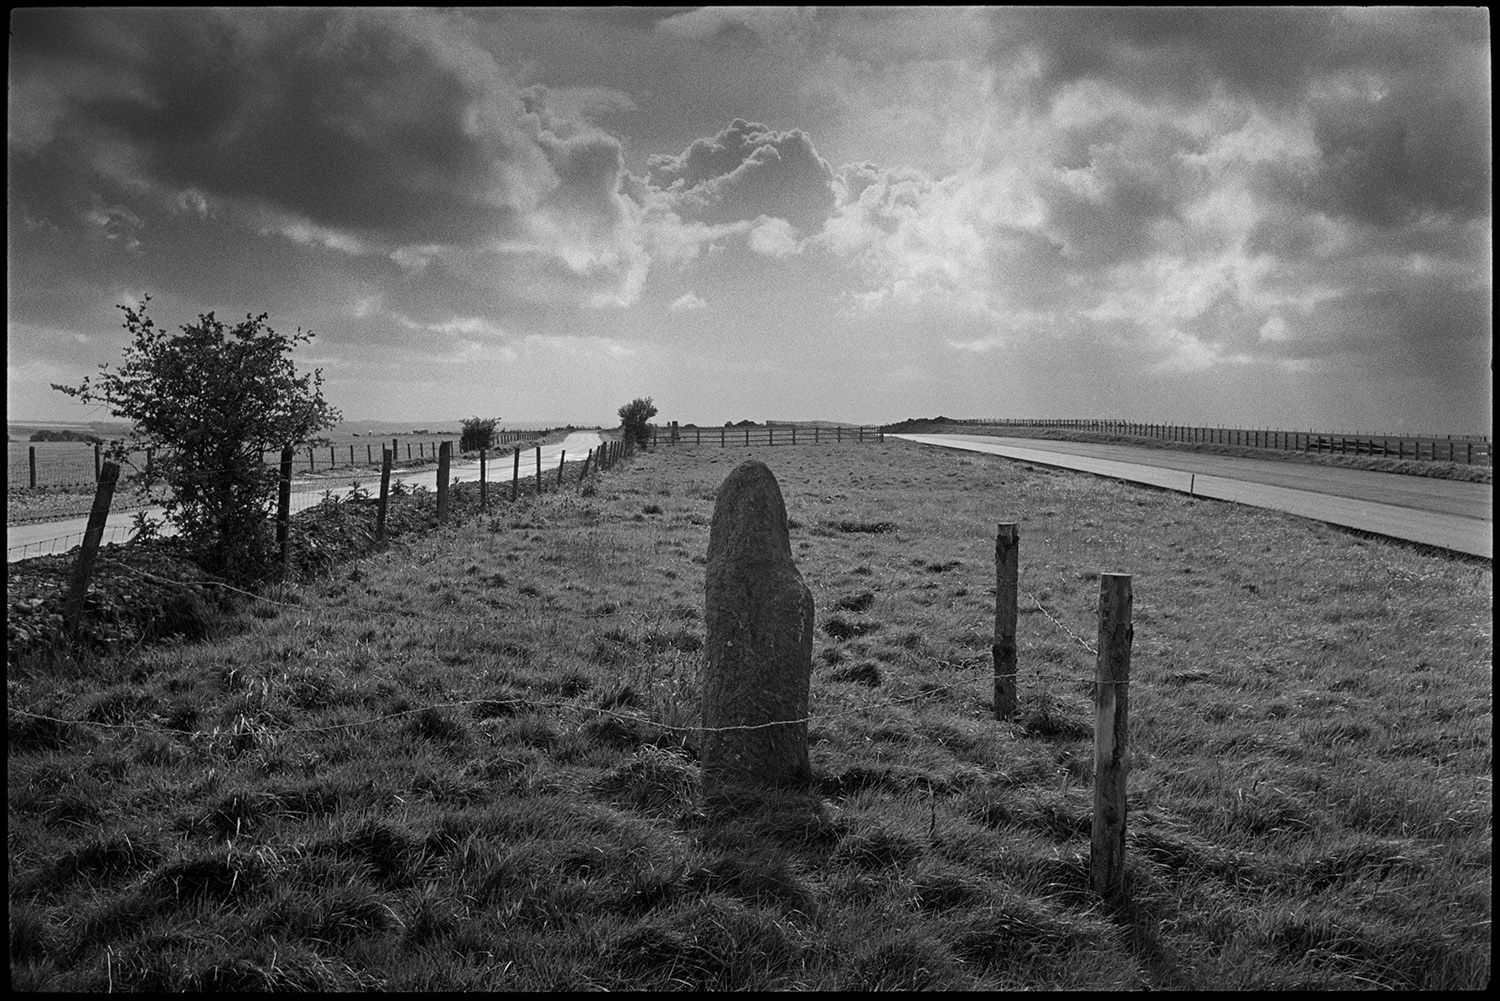 Standing stone beside new road, it was moved before the road was laid down, passing tanker.
[An old standing stone, fenced off by posts and barbed wire, alongside the new North Devon link road near Rackenford. There is another smaller road and  wooden fences in the background, with a stormy sky above.]